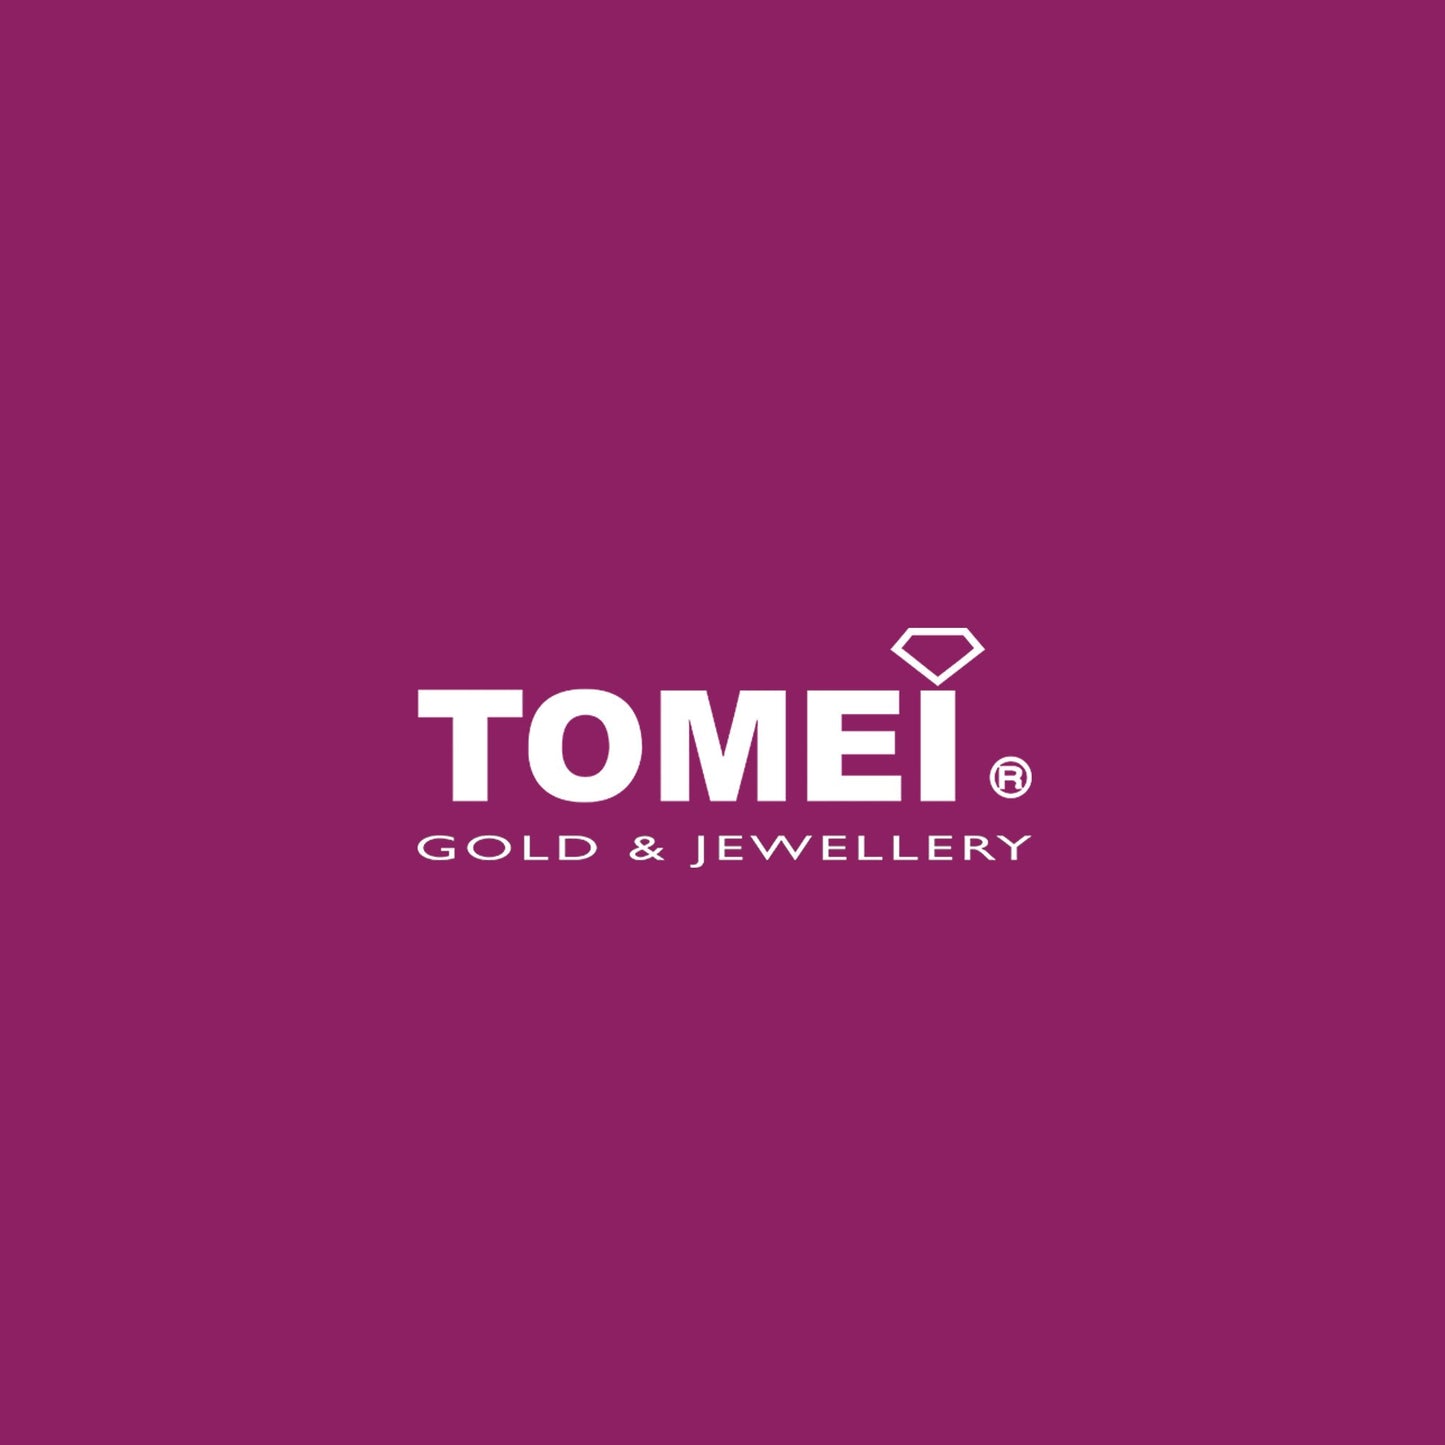 Averment of Love and Romance Charm | Tomei White Gold 585 (14K) (P5520)